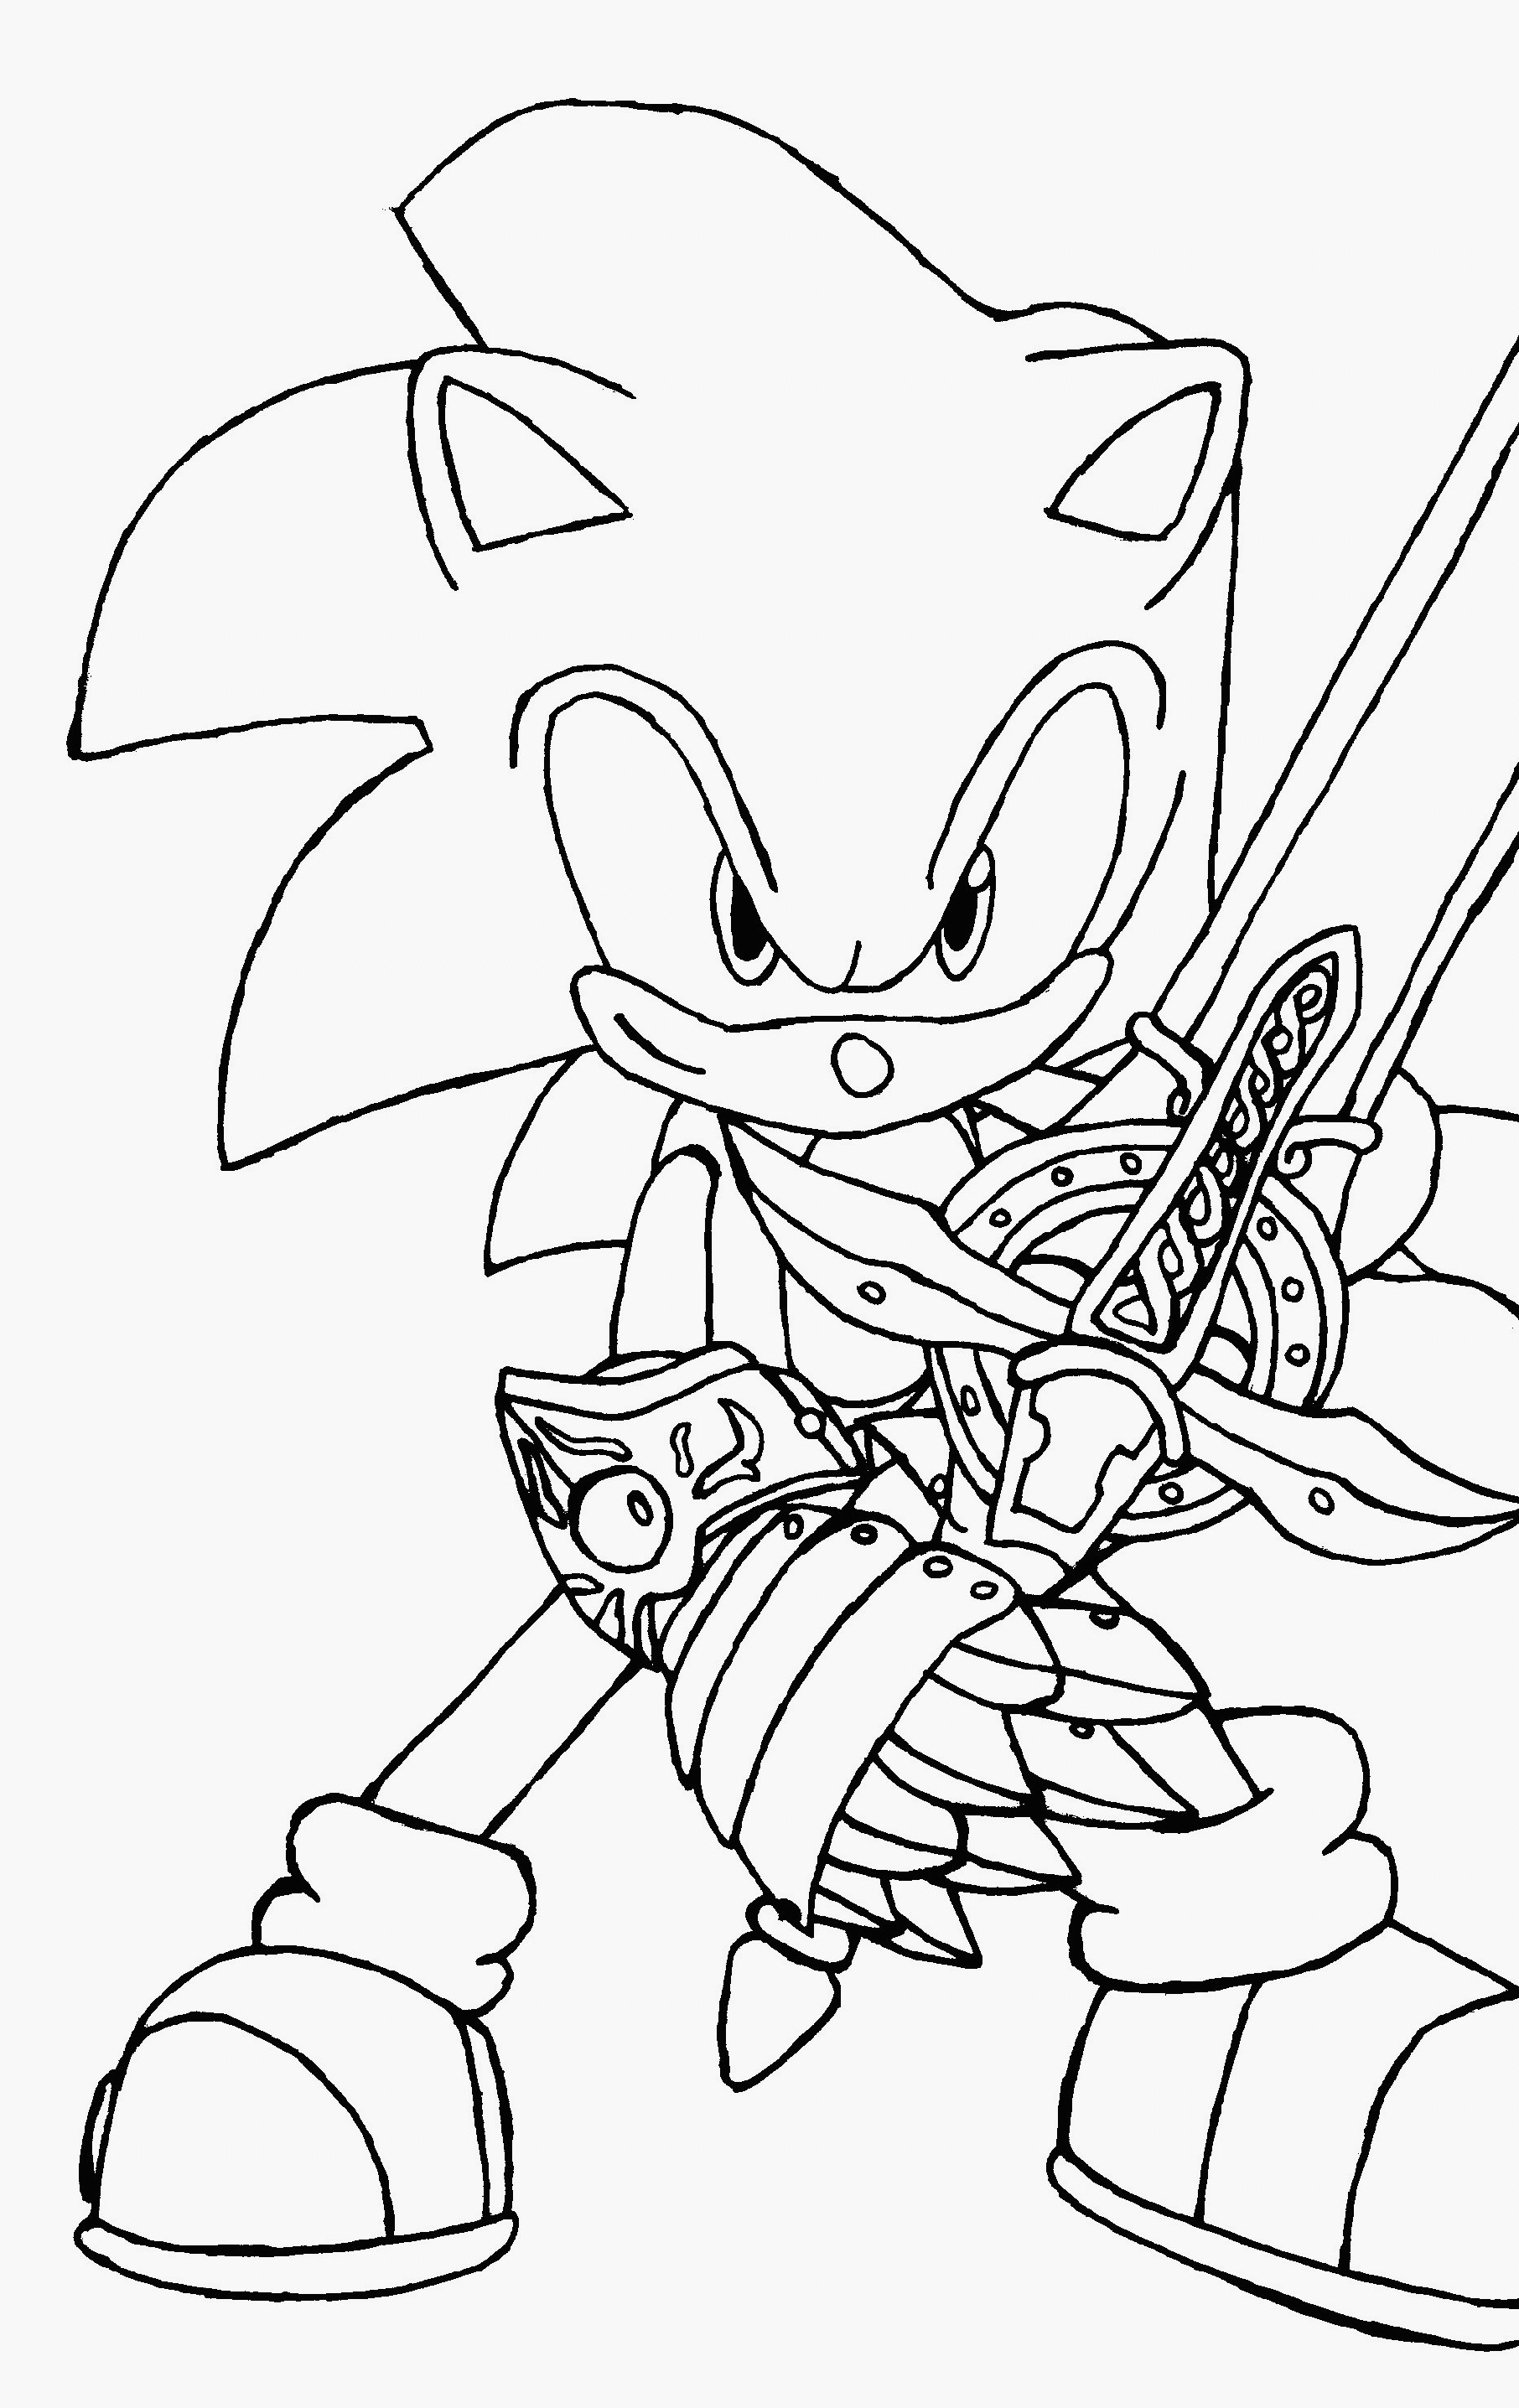 Sonic Boom Coloring Pages To Print - Coloring